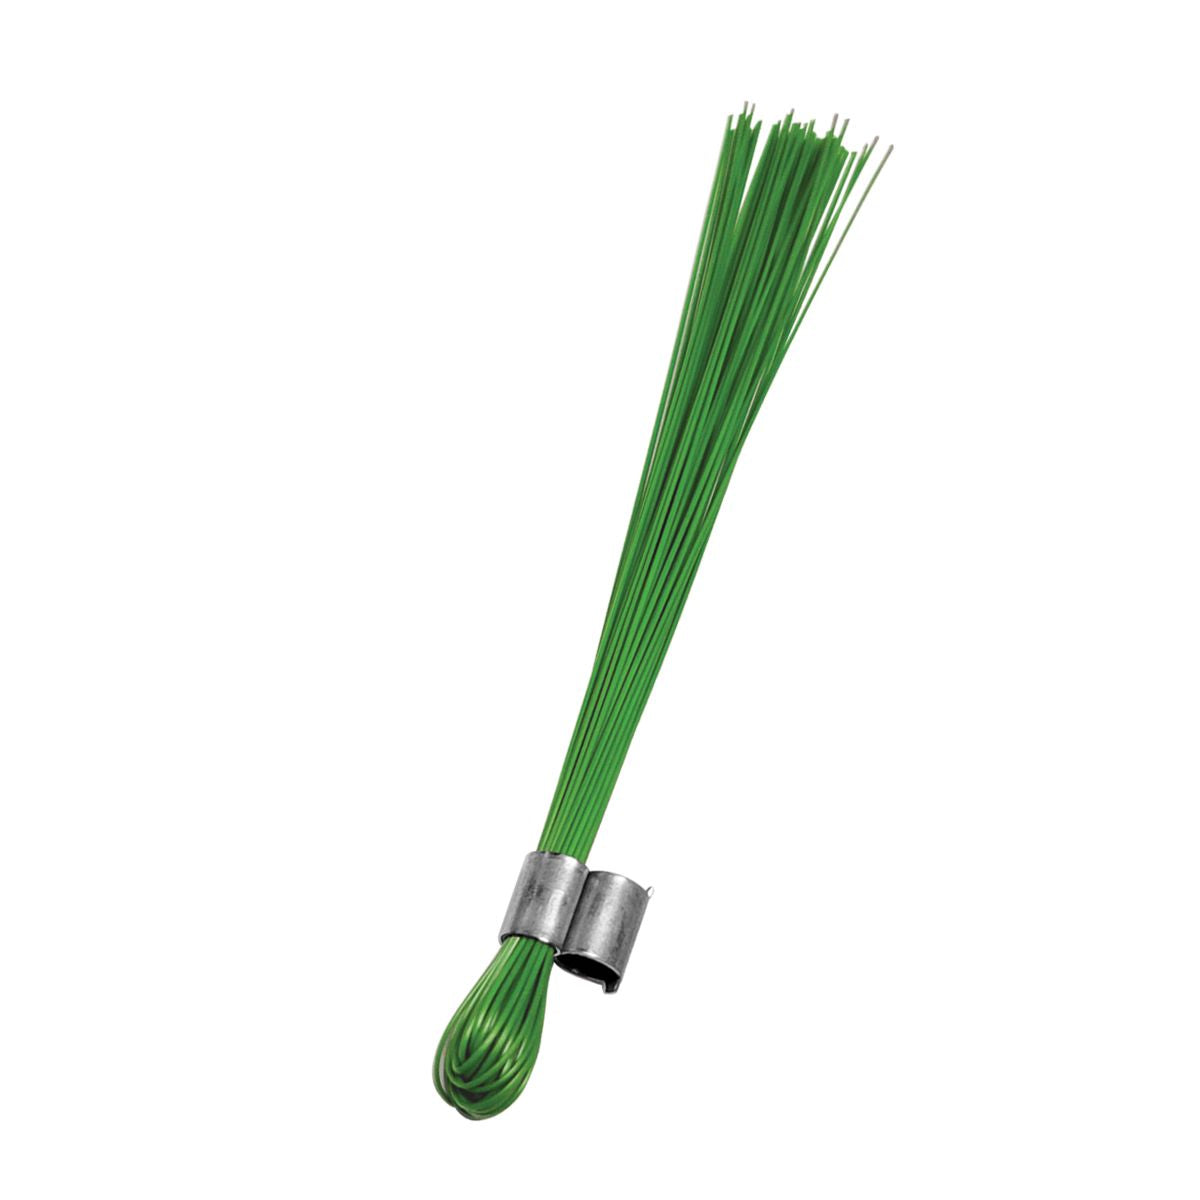 SitePro 19-SW6-G Stake Whiskers, Green 25 per bundle